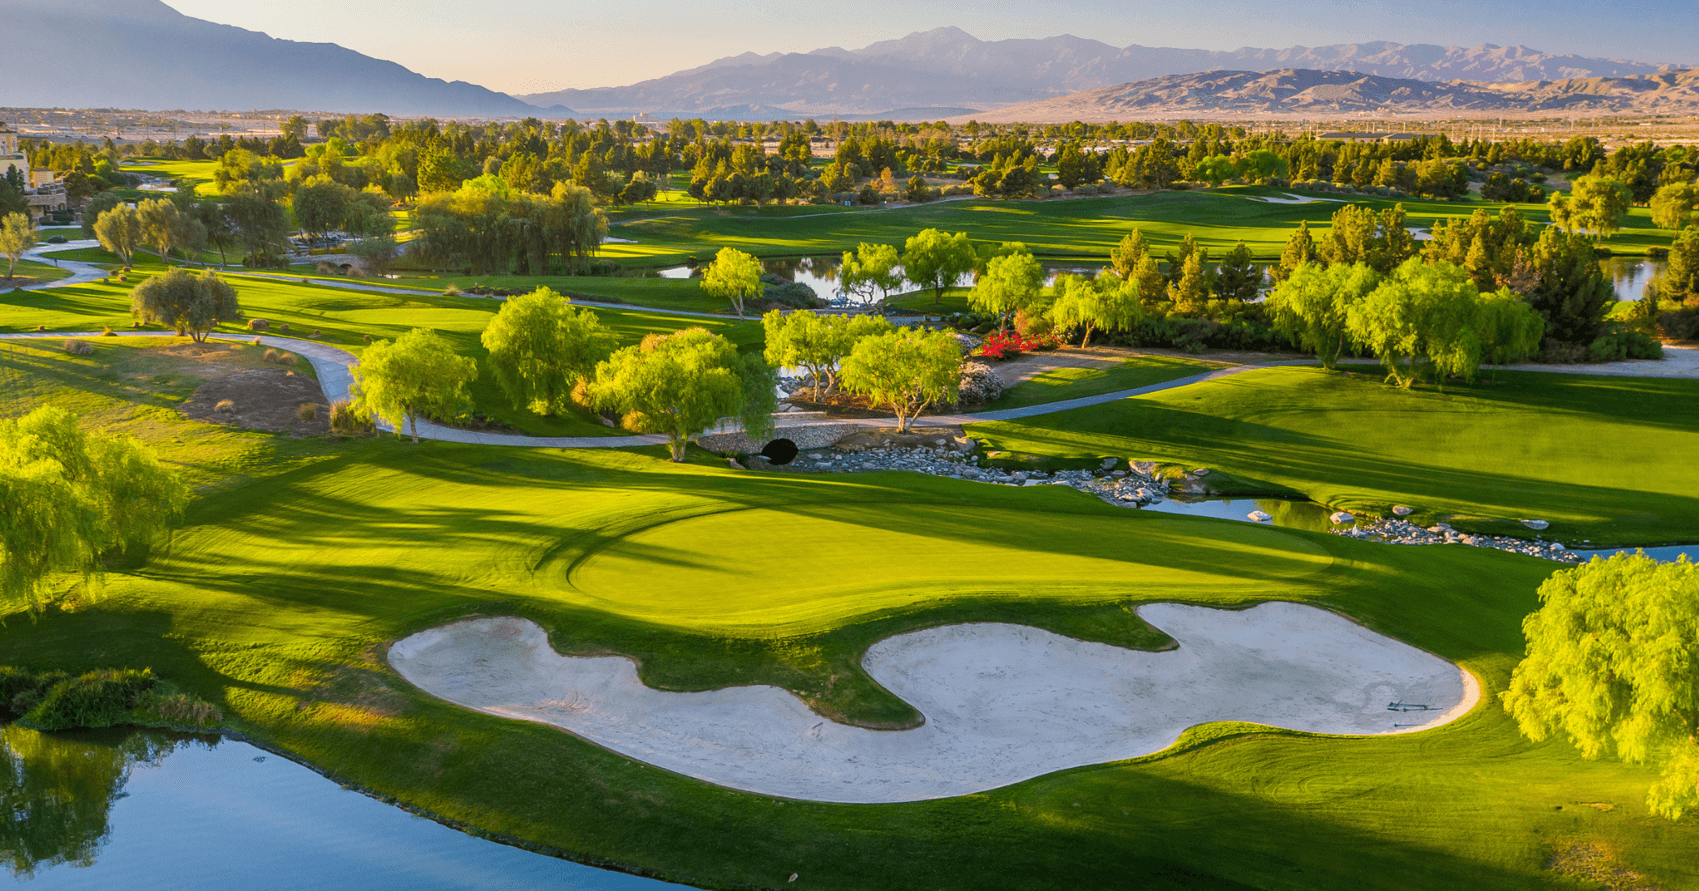 Things to do in Greater Palm Springs